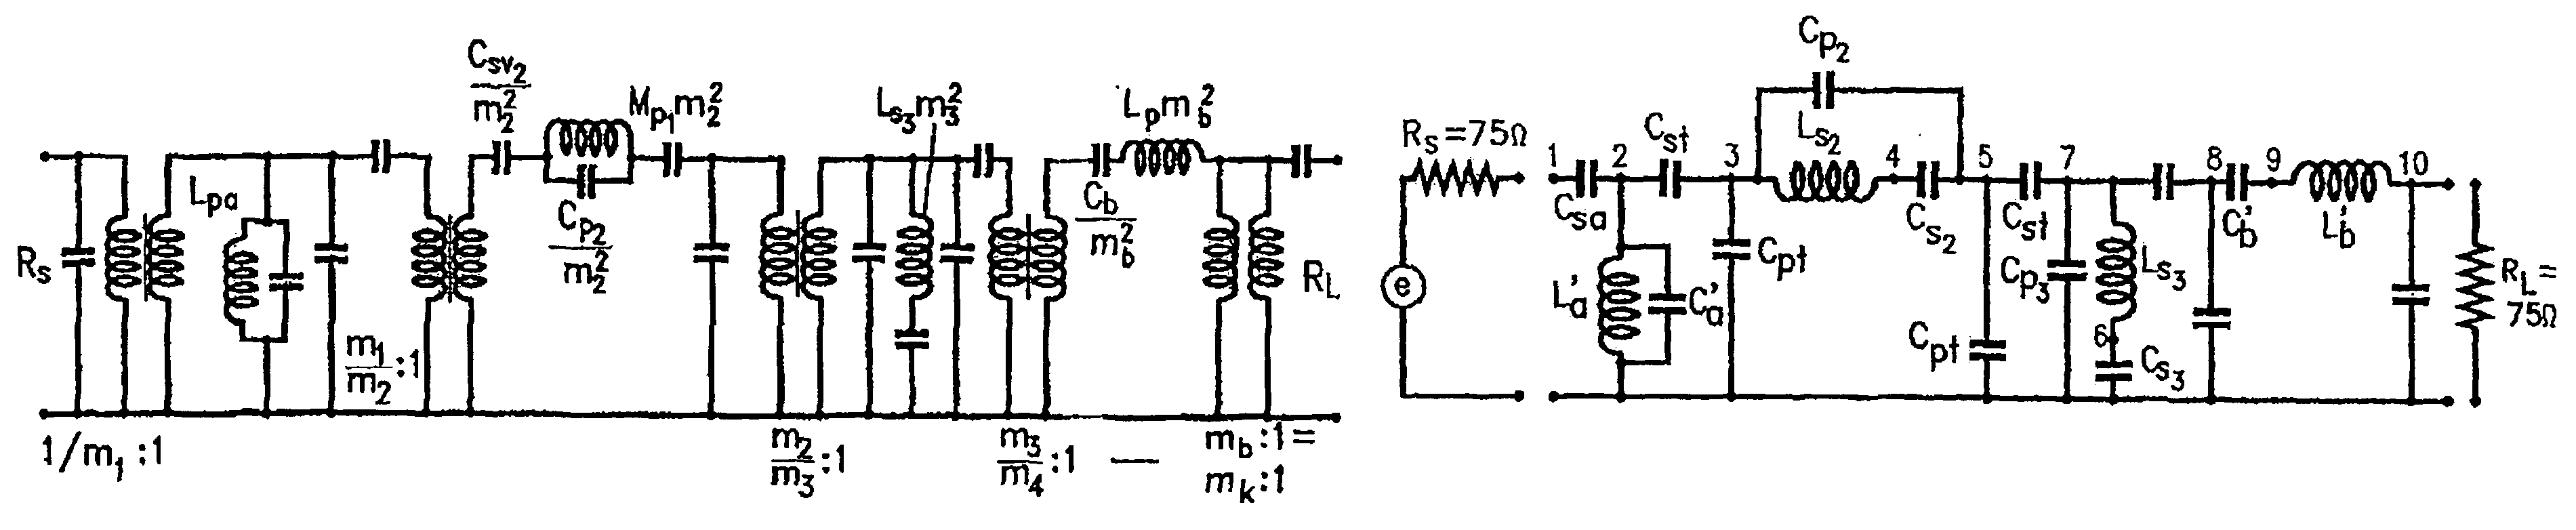 Method for transforming bandpass filters to facilitate their production and resulting devices